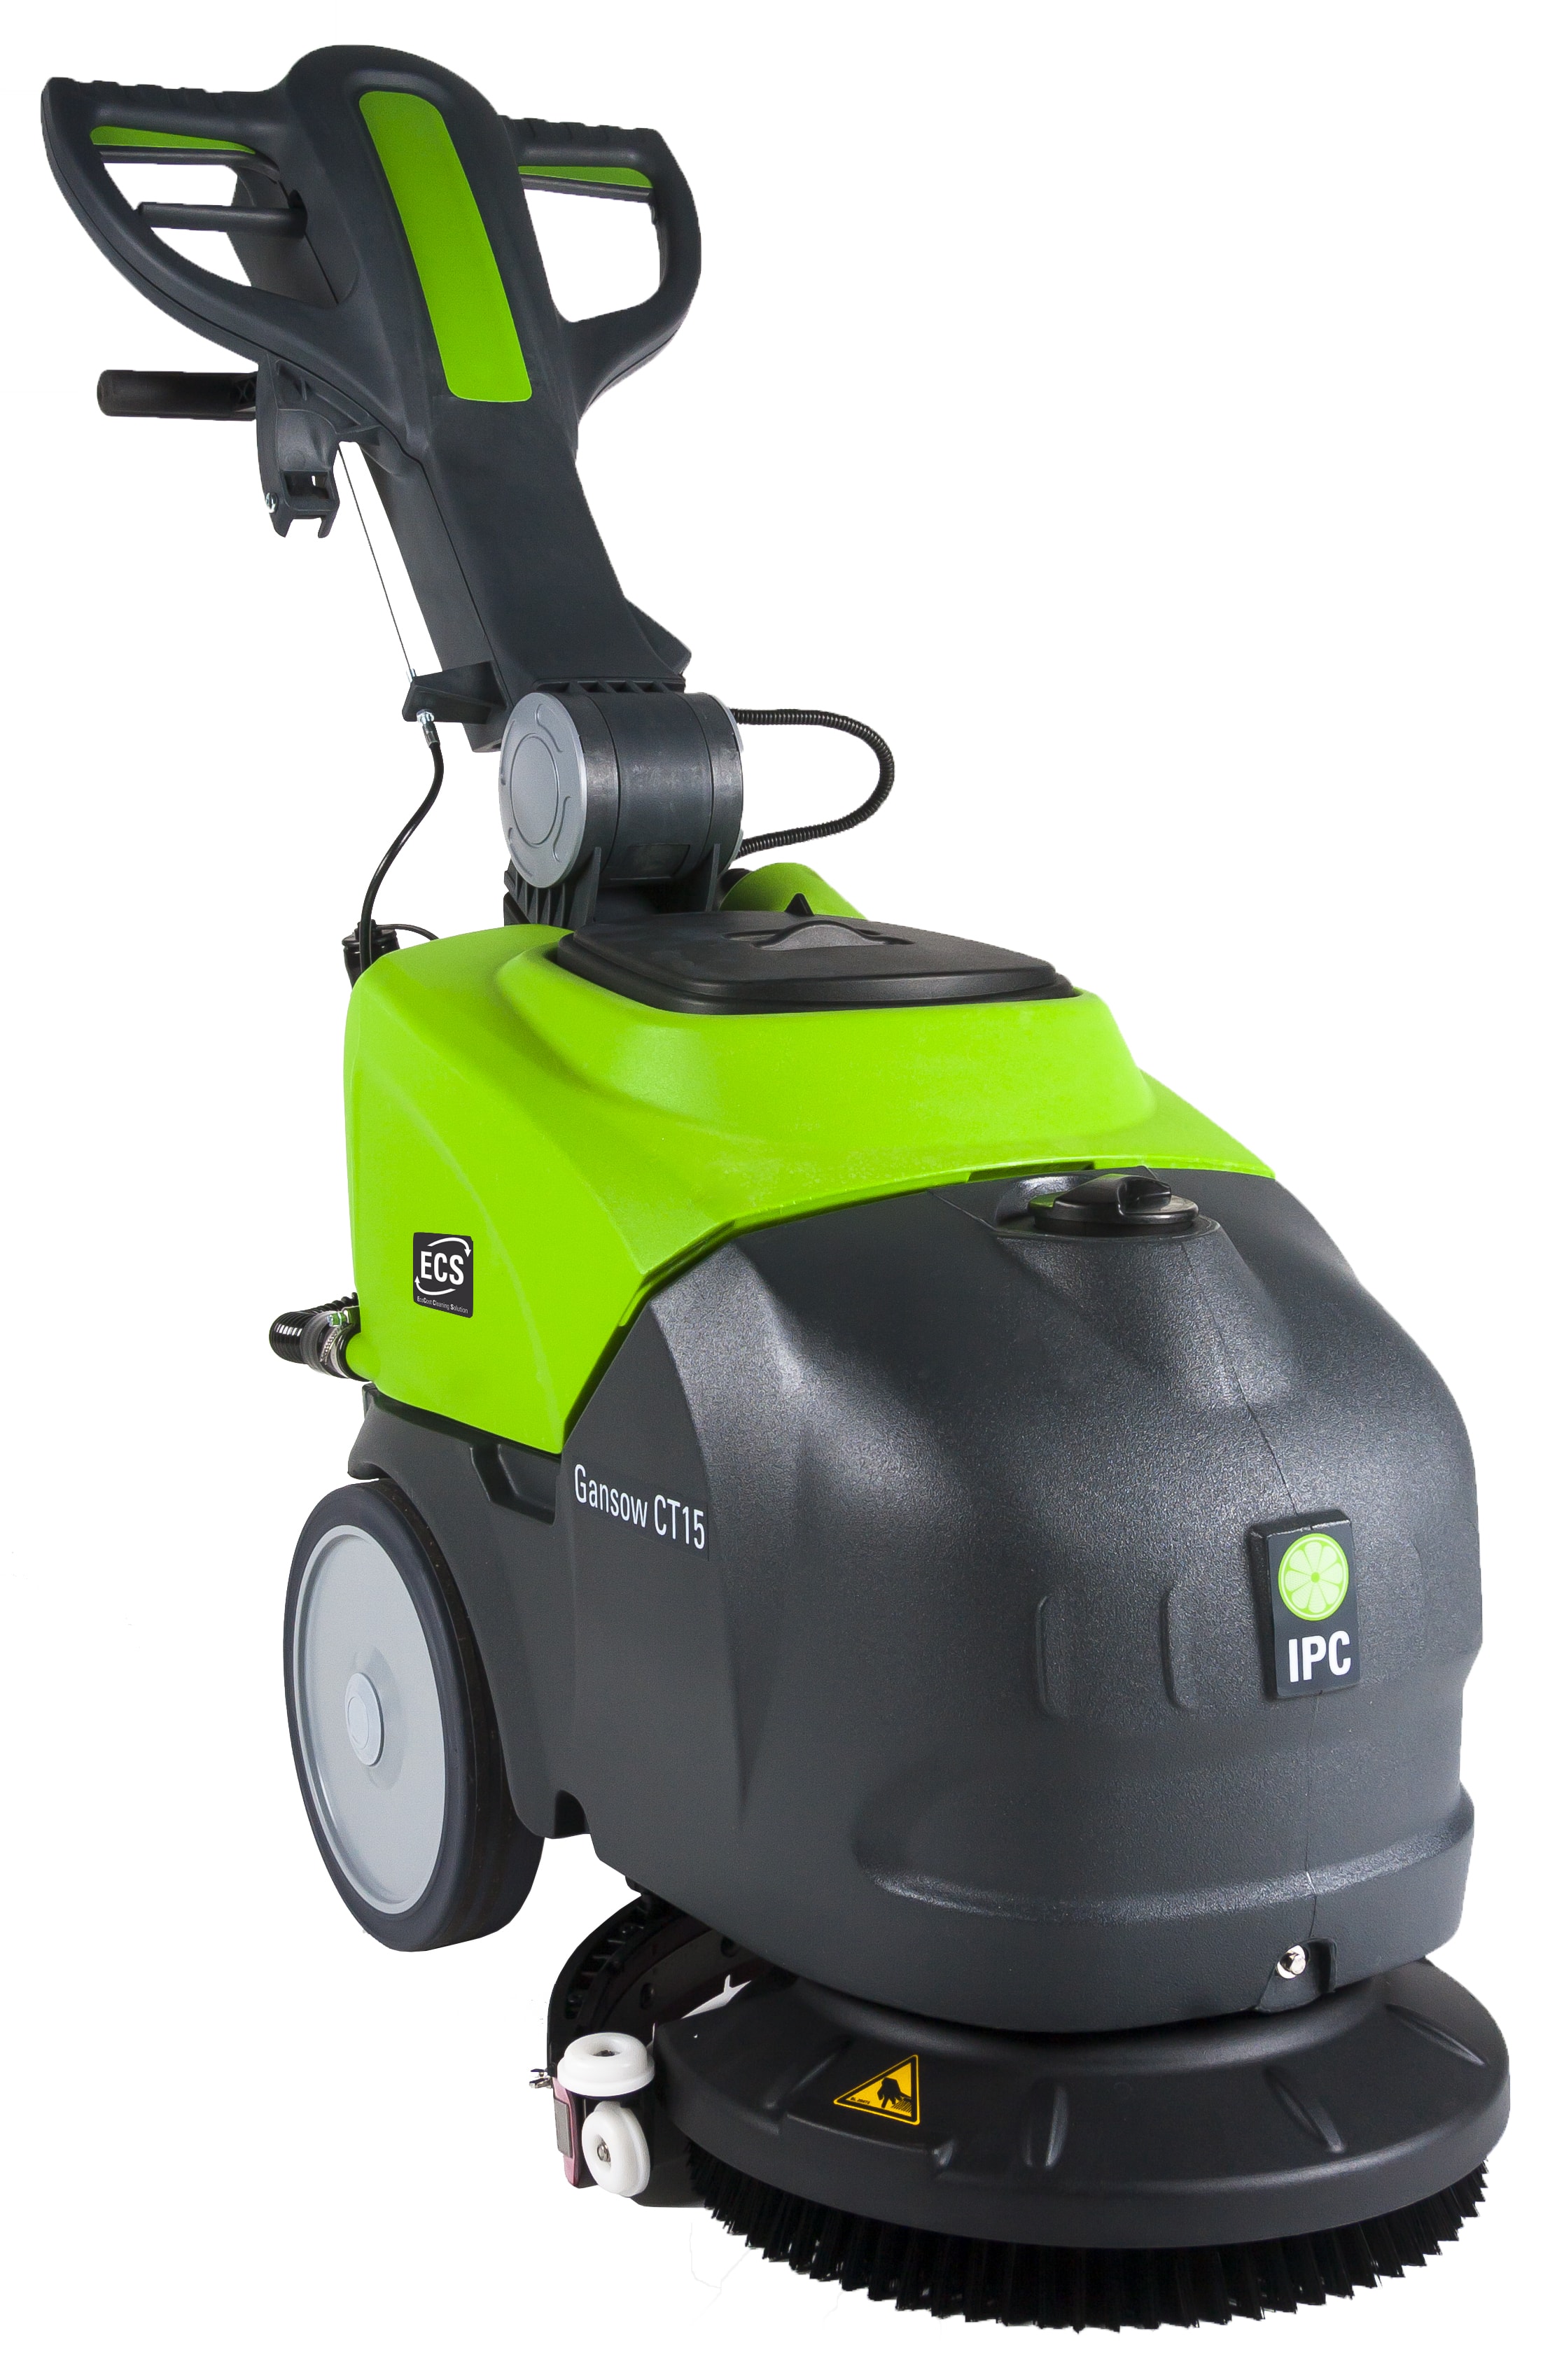 15, ct, CT15, ct15 ct 15, CT 15, clean time 15, automatic scrubber, 15, ct, CT 15 ECS, ct15ecs, ct 15, ct15 ecs, ECS ct15,